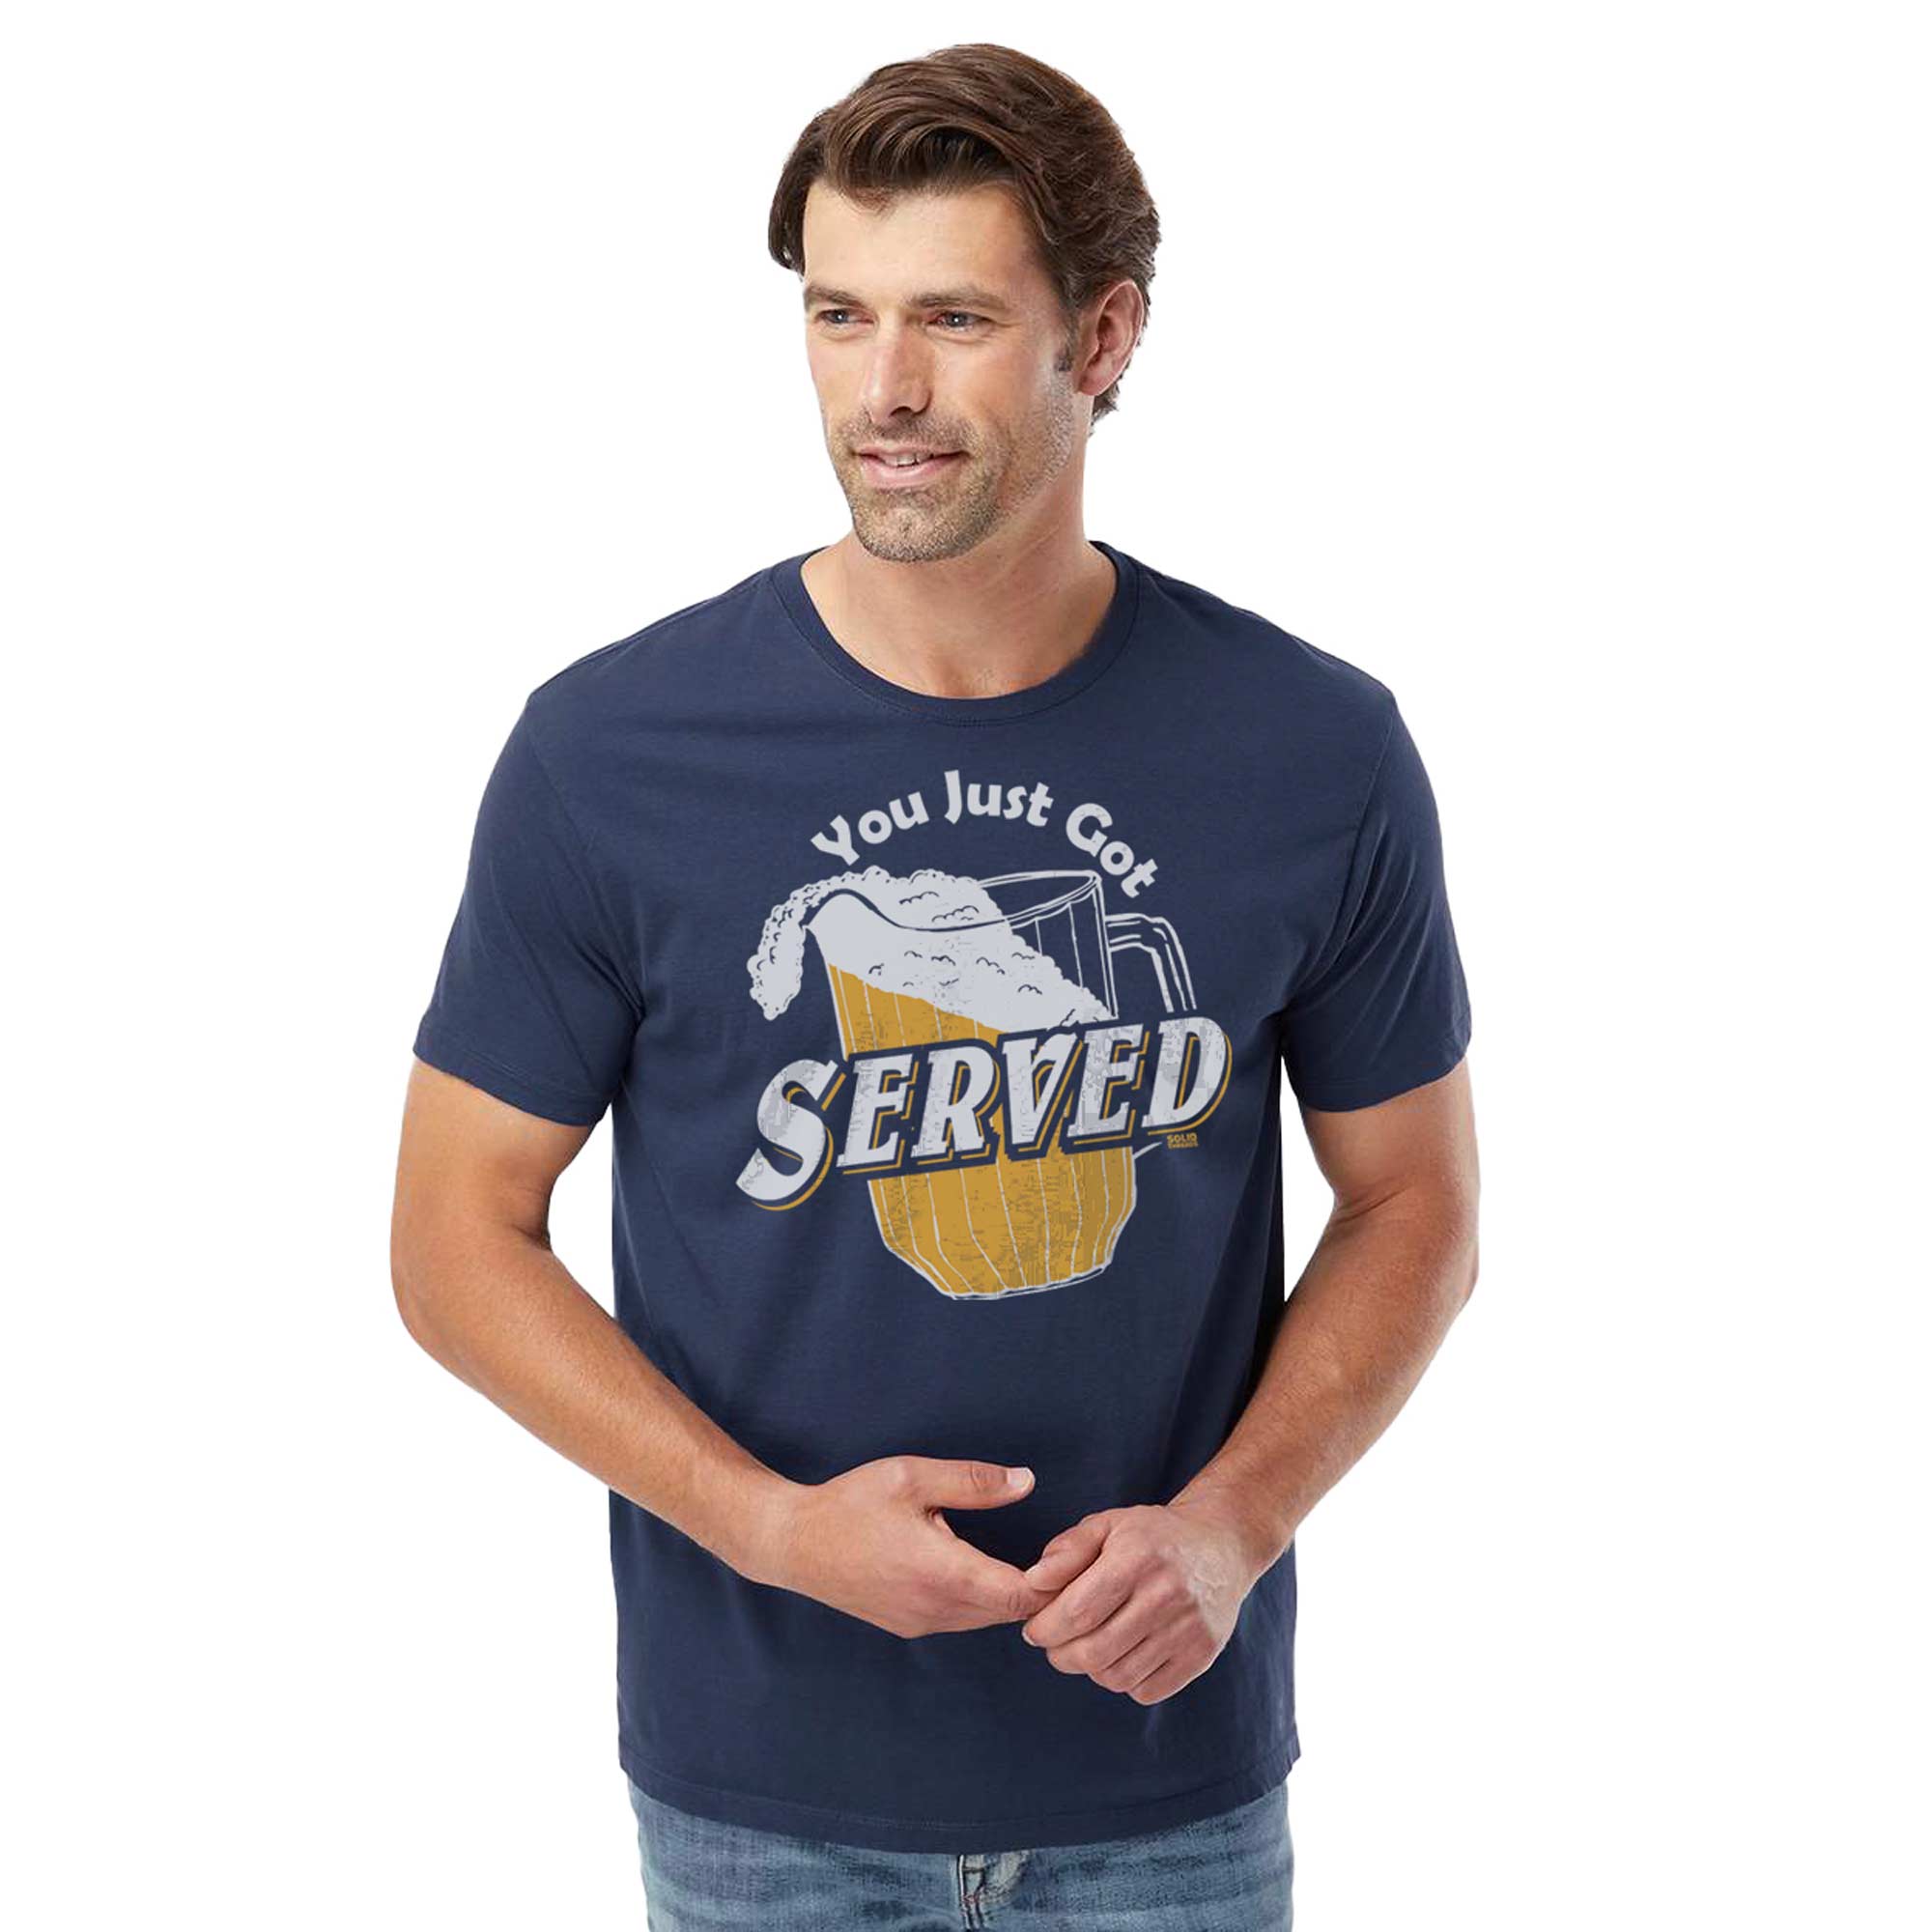 You Just Got Served Funny Organic Cotton T-shirt | Vintage Beer Drinking Tee on Model | Solid Threads